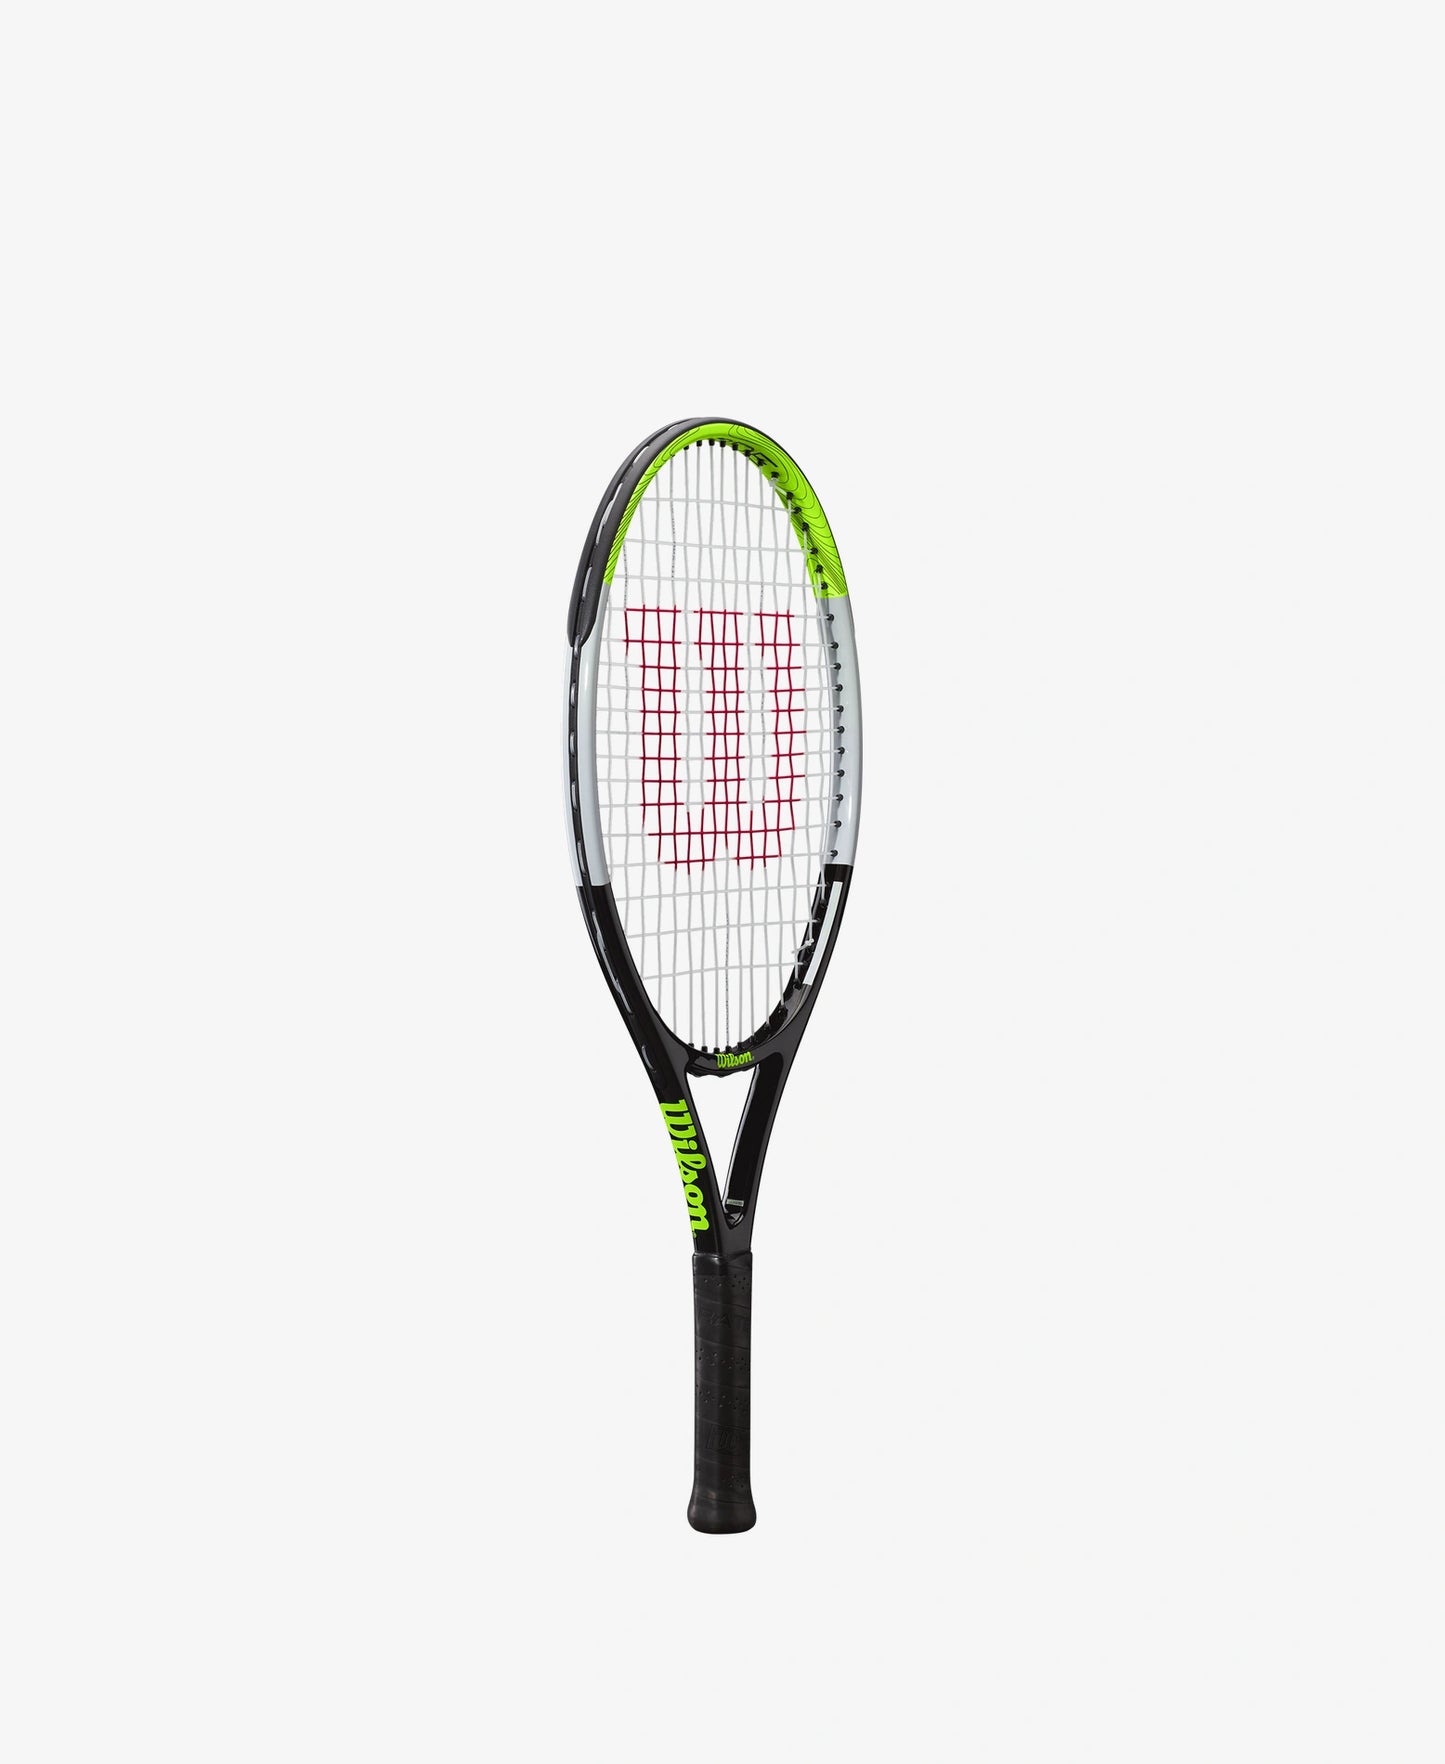 The Wilson Blade Feel 23 Tennis Racket available for sale at GSM Sports.  